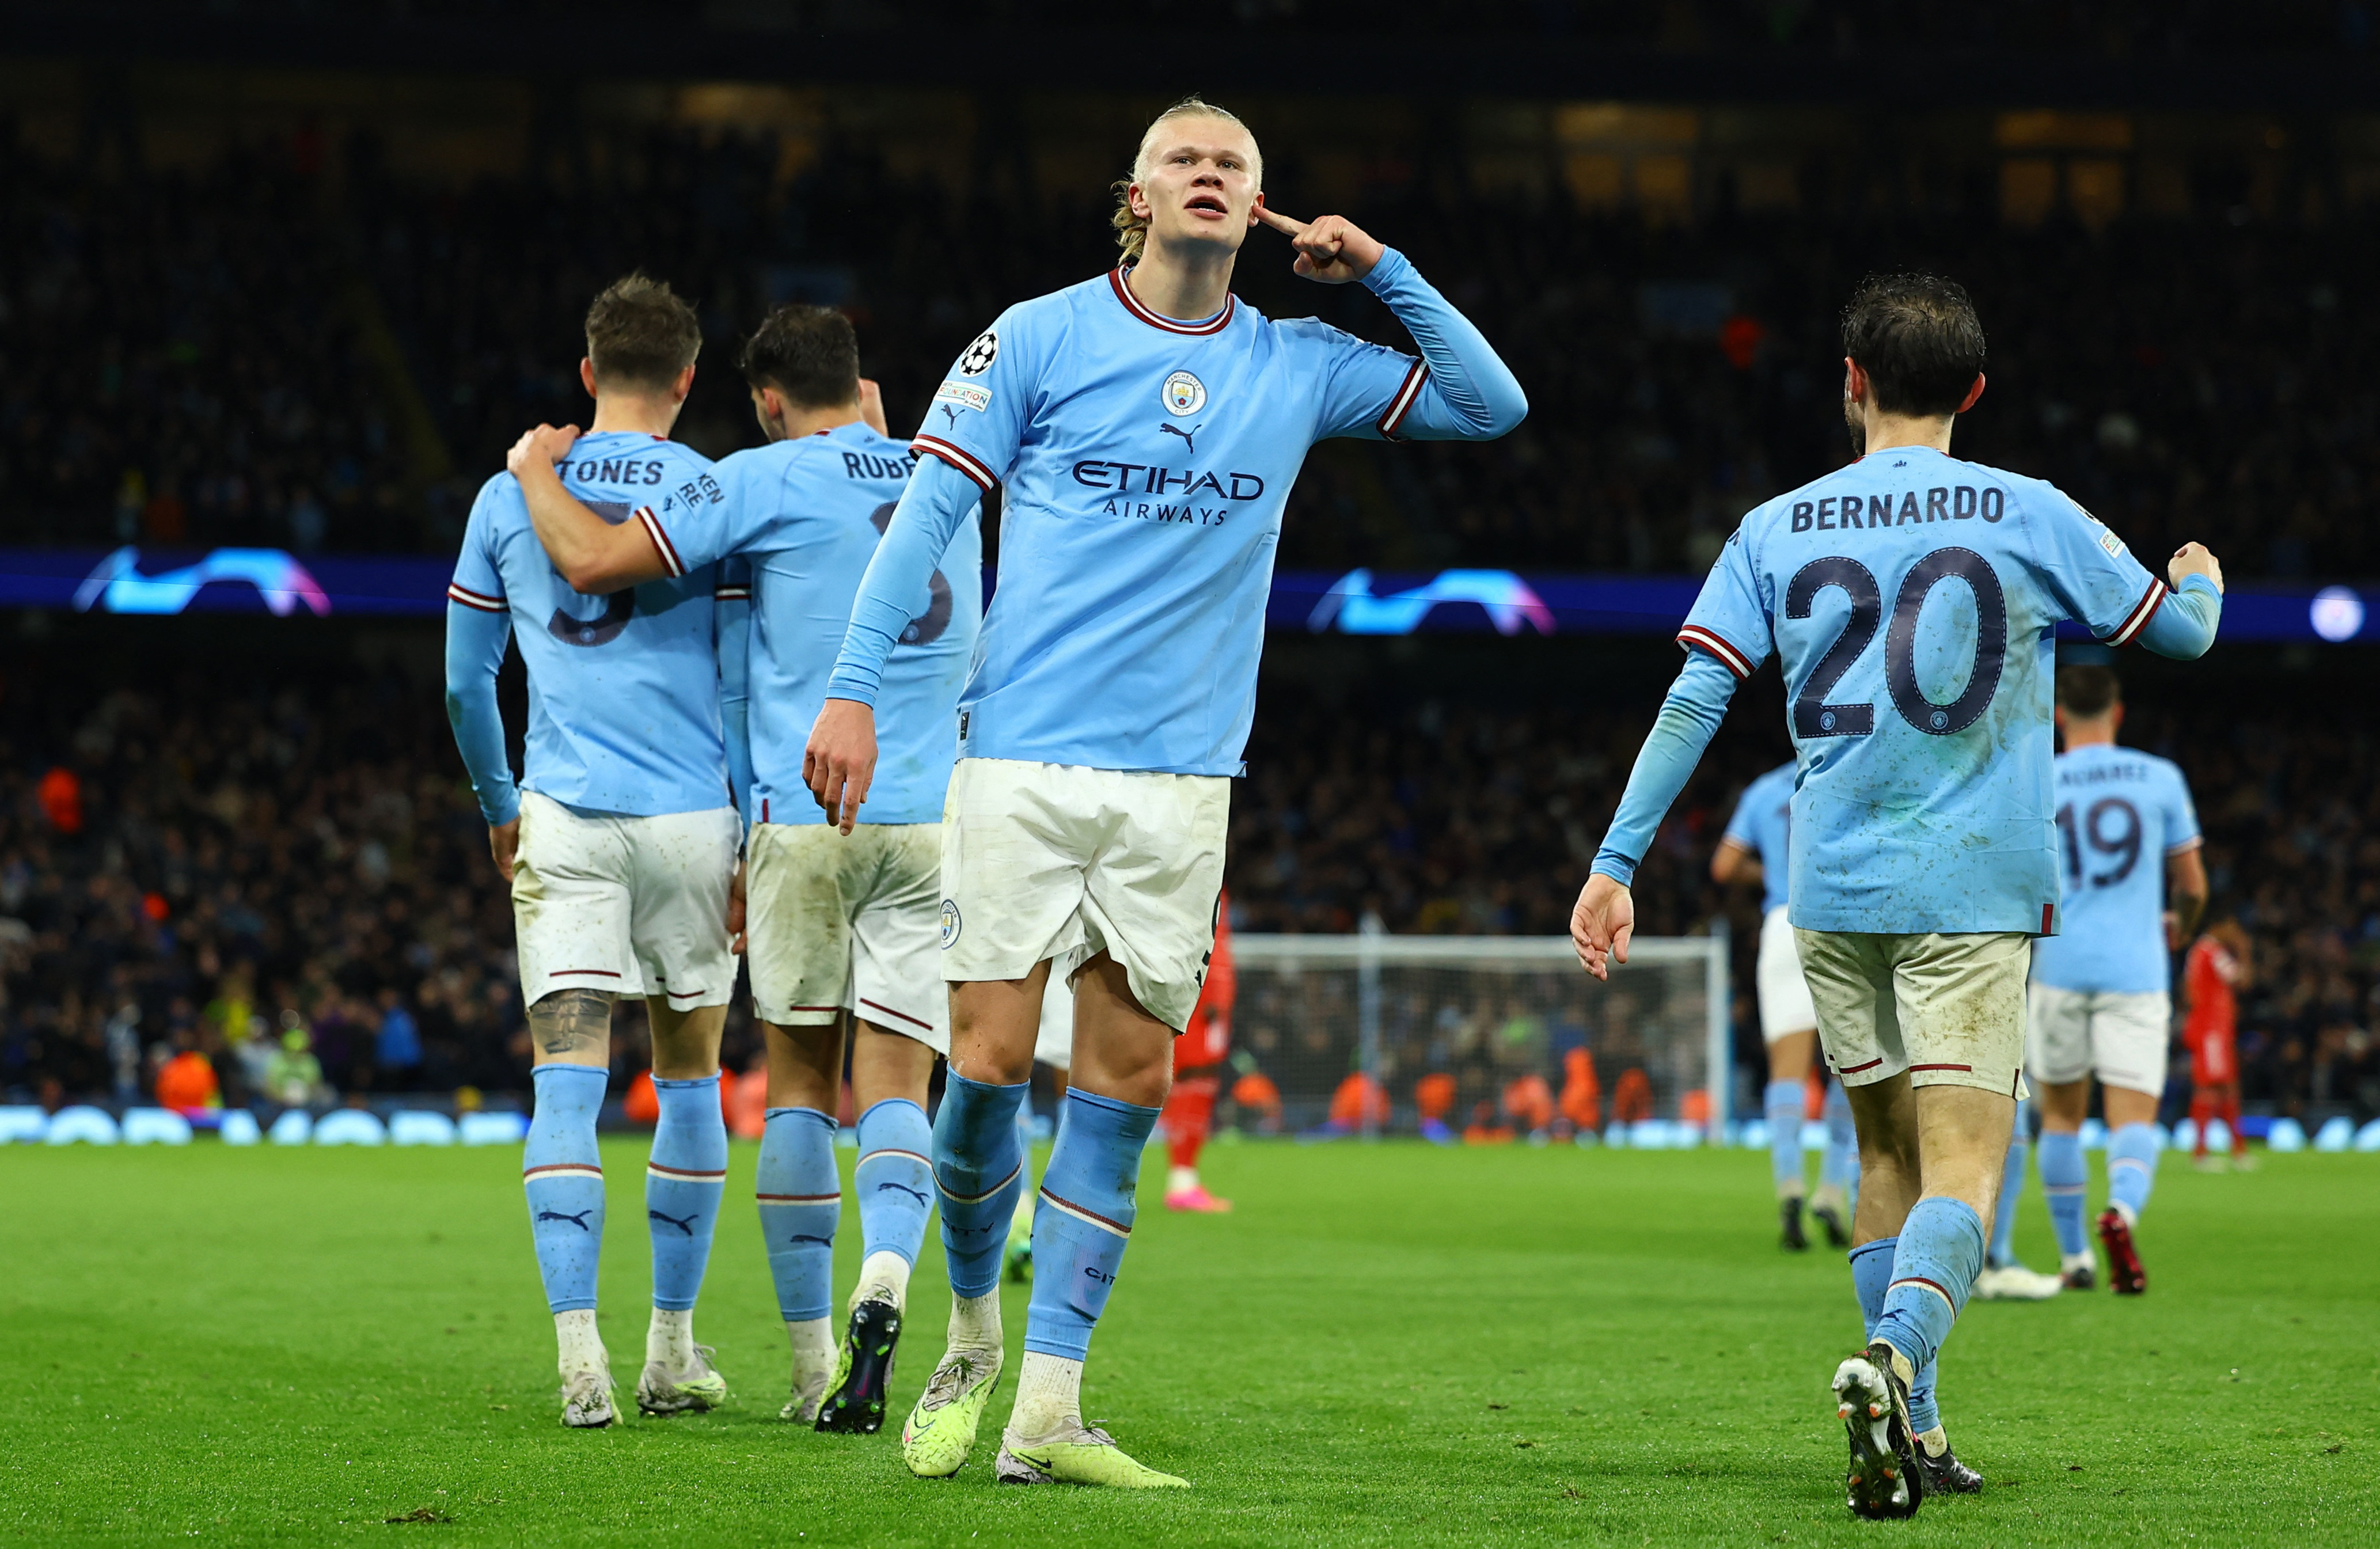 Erling Haaland scored one of the three goals in Manchester City's victory over Bayern Munich in the Champions League quarterfinal first leg.  (Reuters)